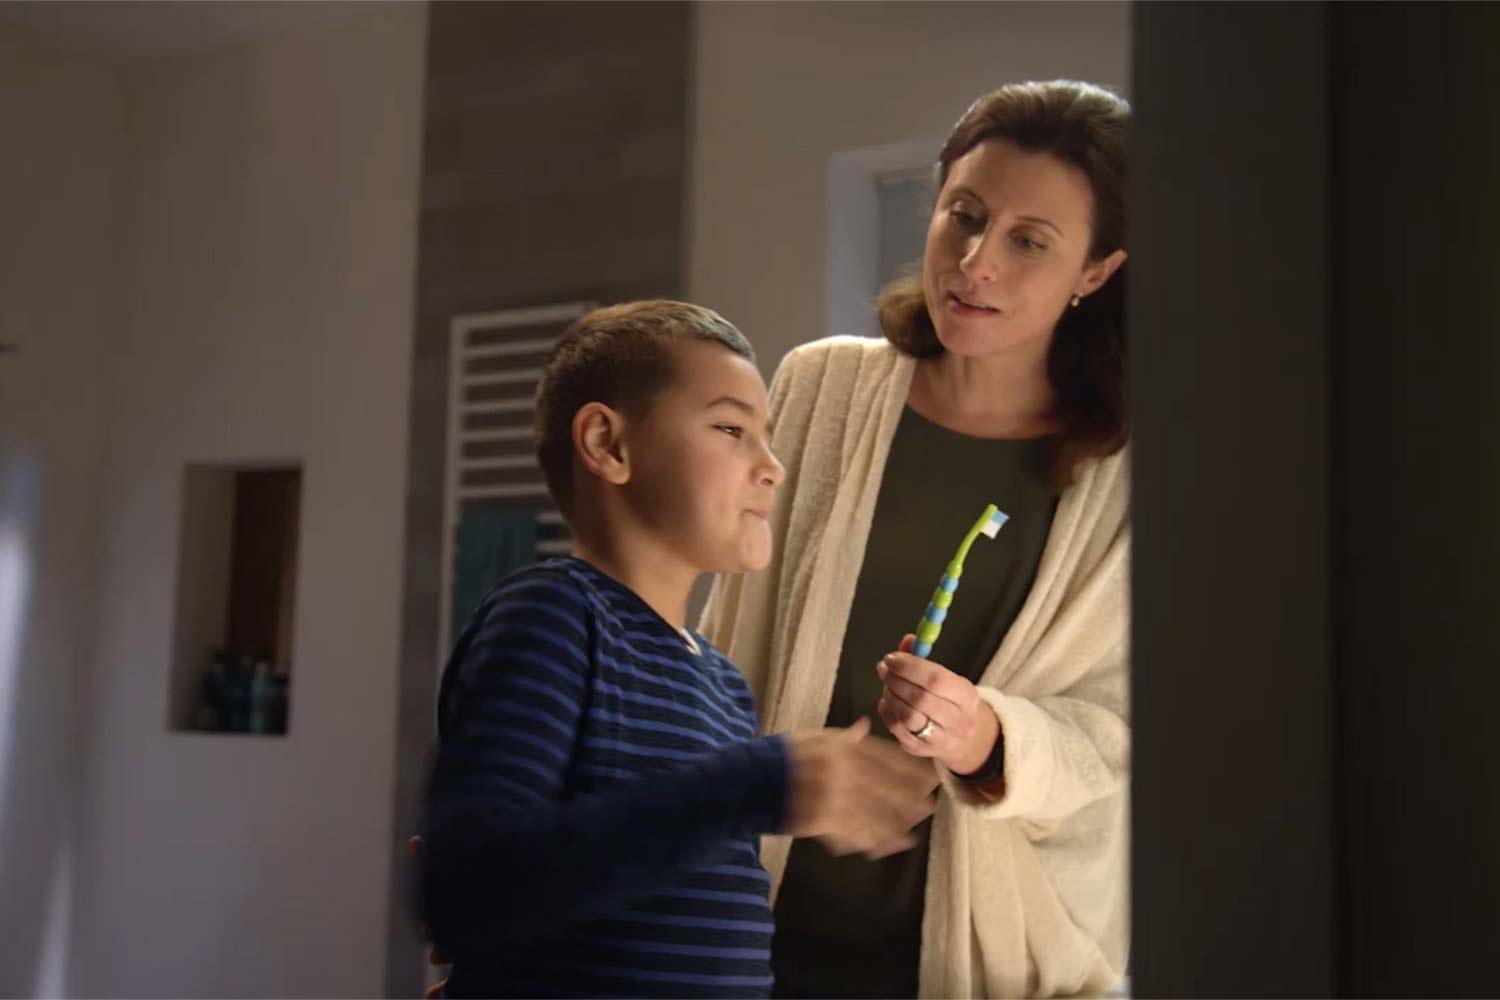 philips sonicare bluetooth toothbrush has a coaching app for kids connected usp3 00